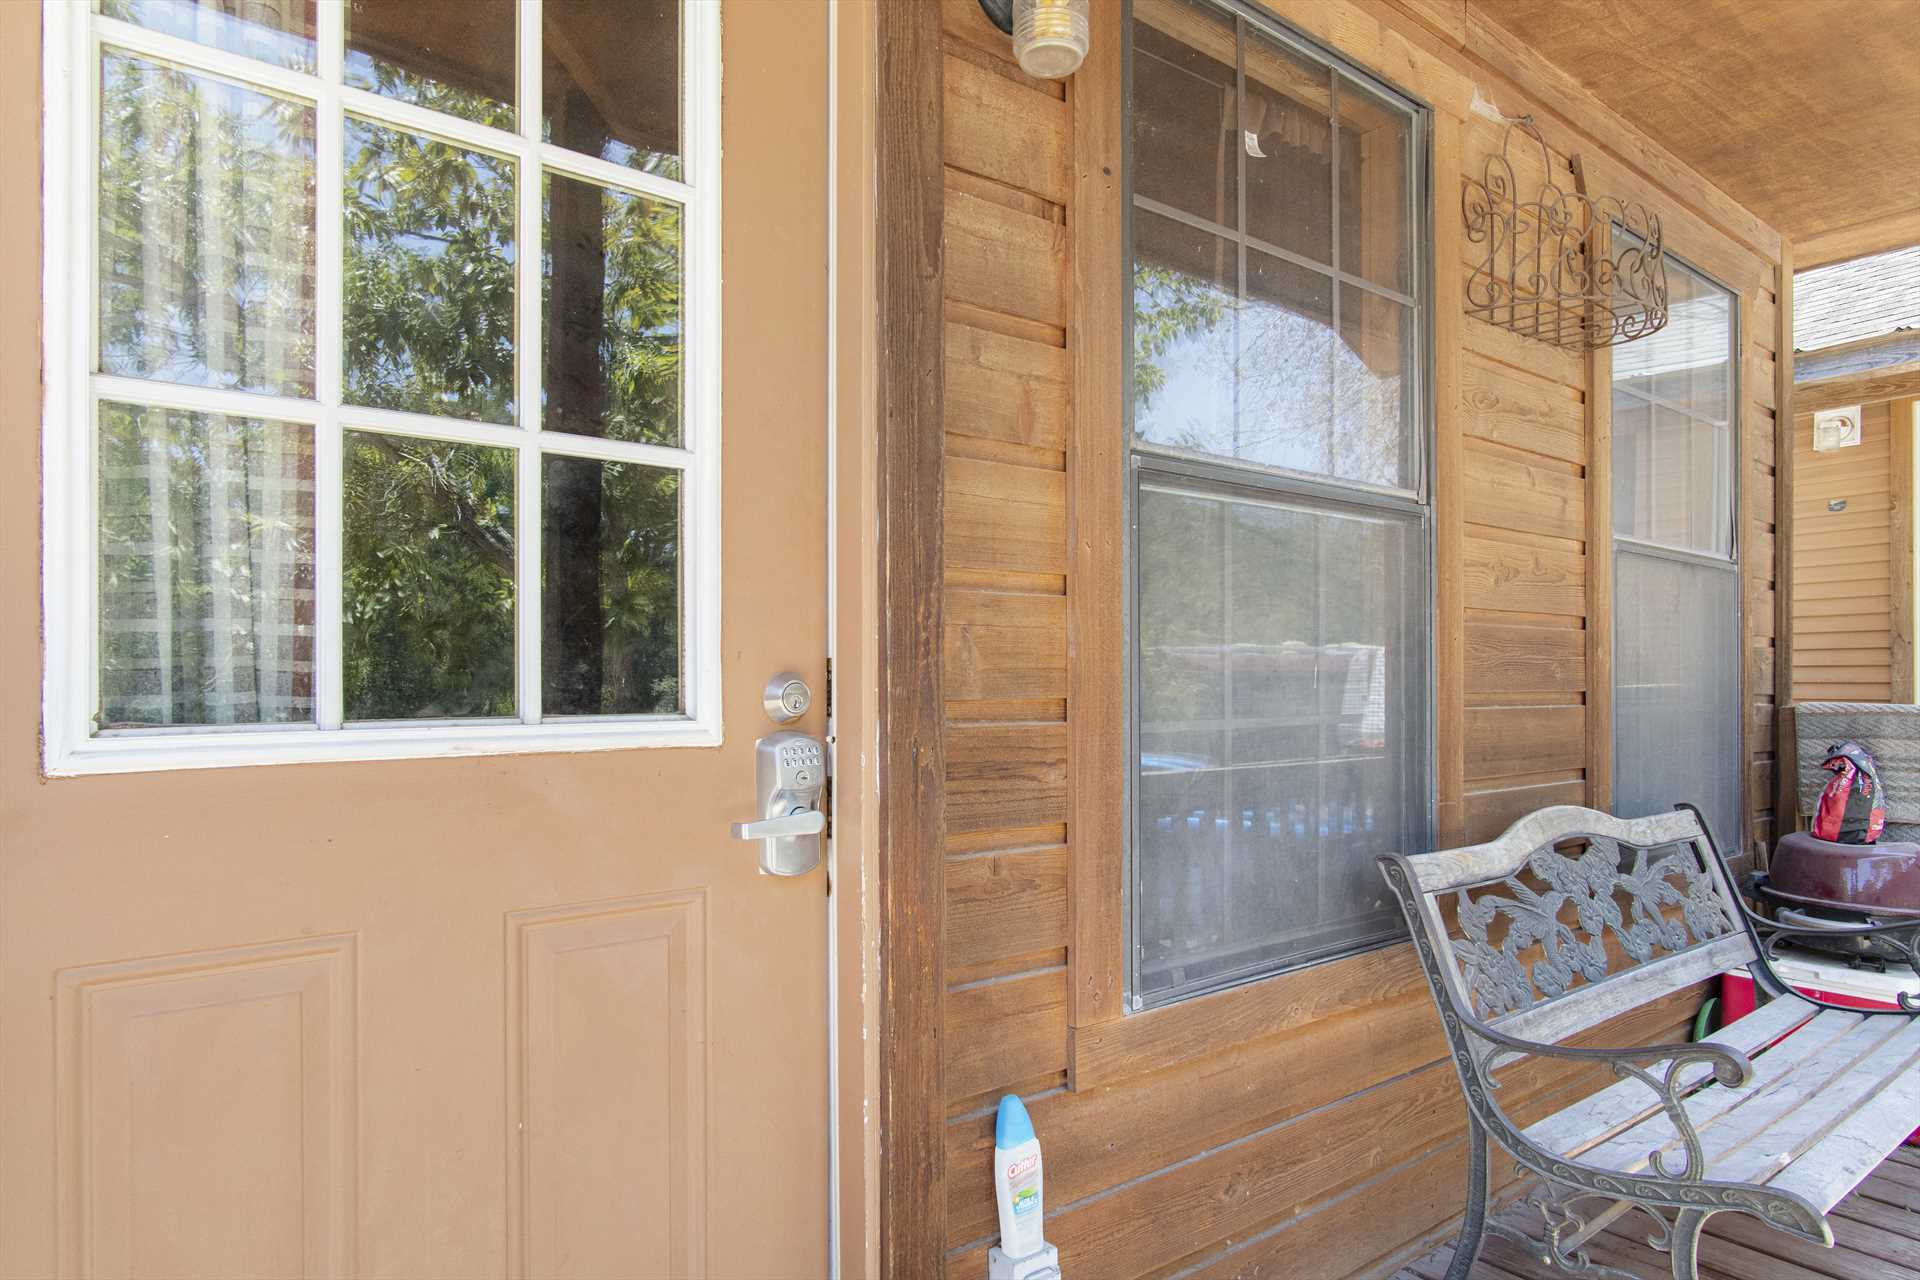                                                 Comfortable outdoor furniture on the cabin's shaded deck provides great relaxation space in the Hill Country breezes!